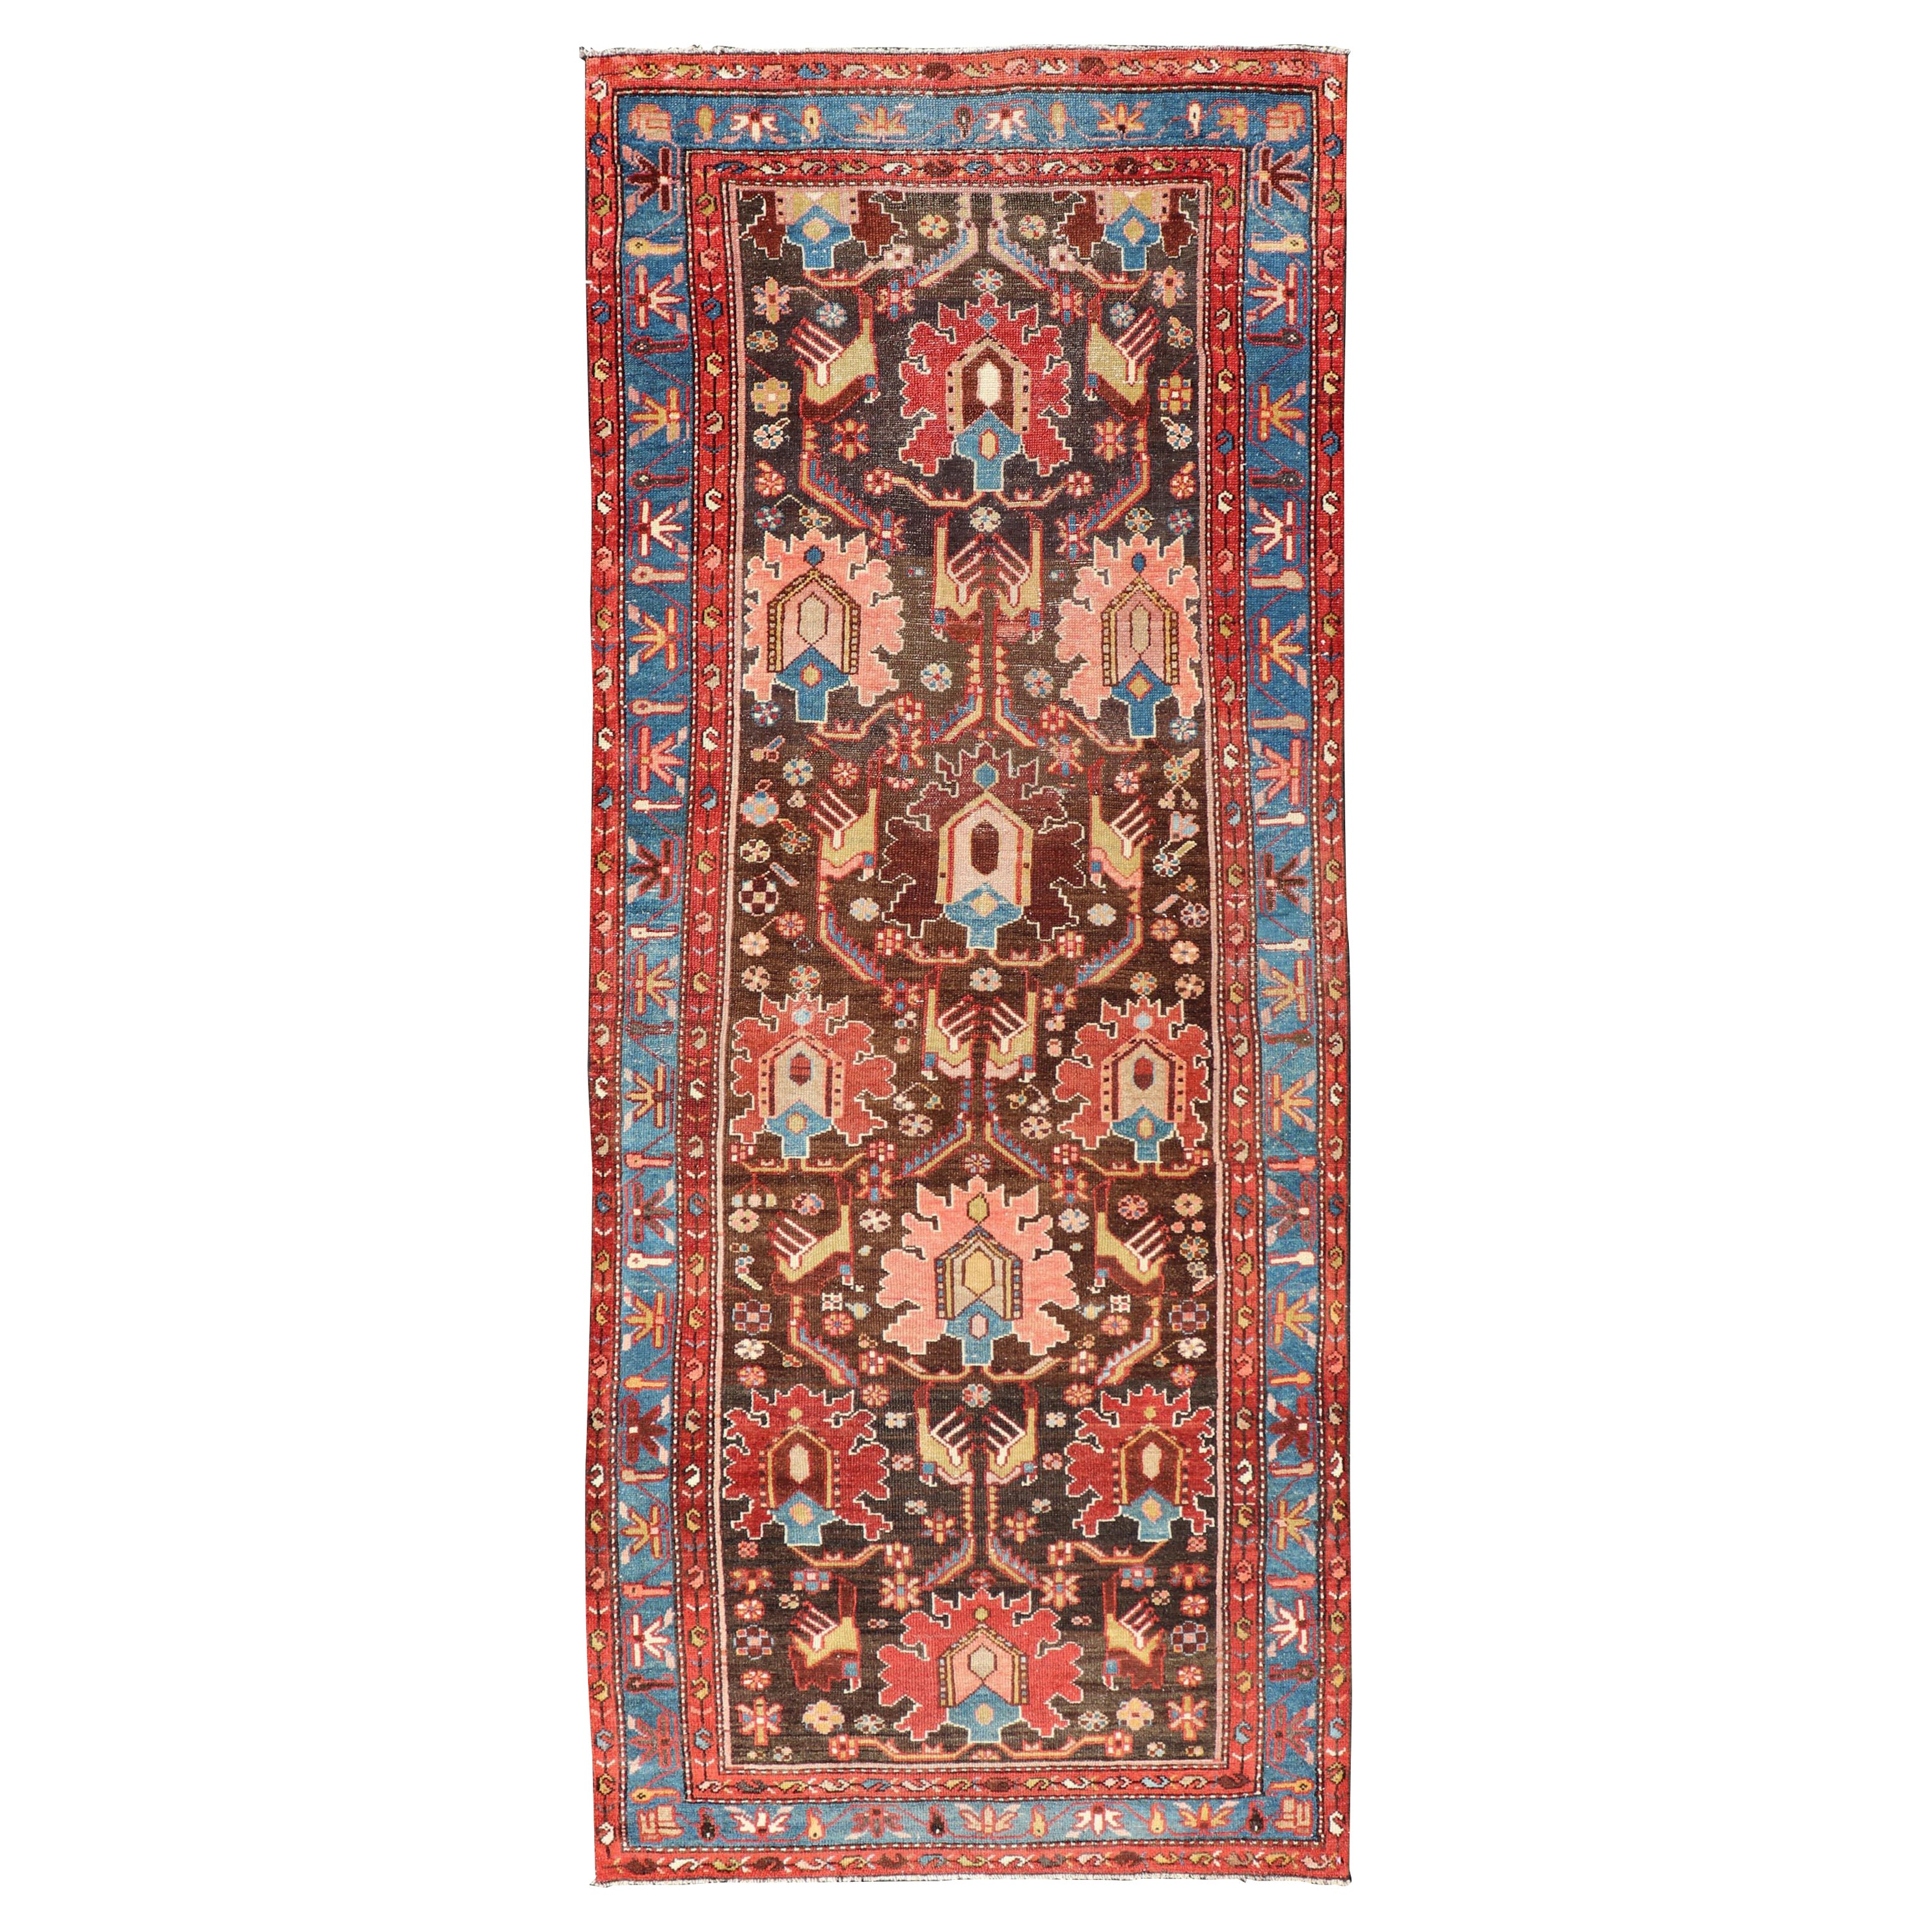 Antique Persian Tribal Designed Hamadan in Multi-Tiered Border in Brown and Blue For Sale